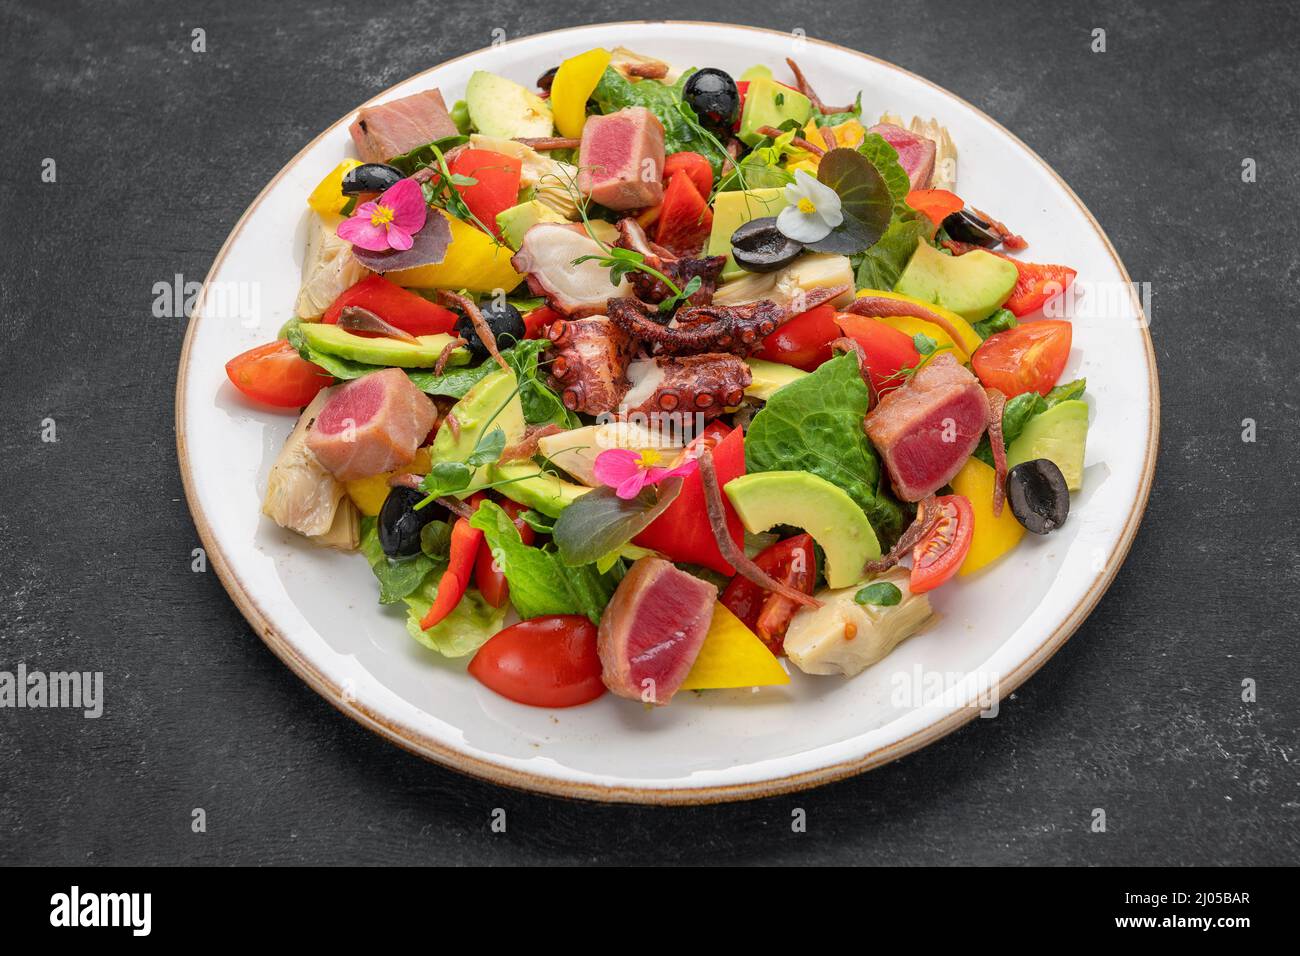 Salad with octopus, tuna and vegetables, on a dark background Stock Photo